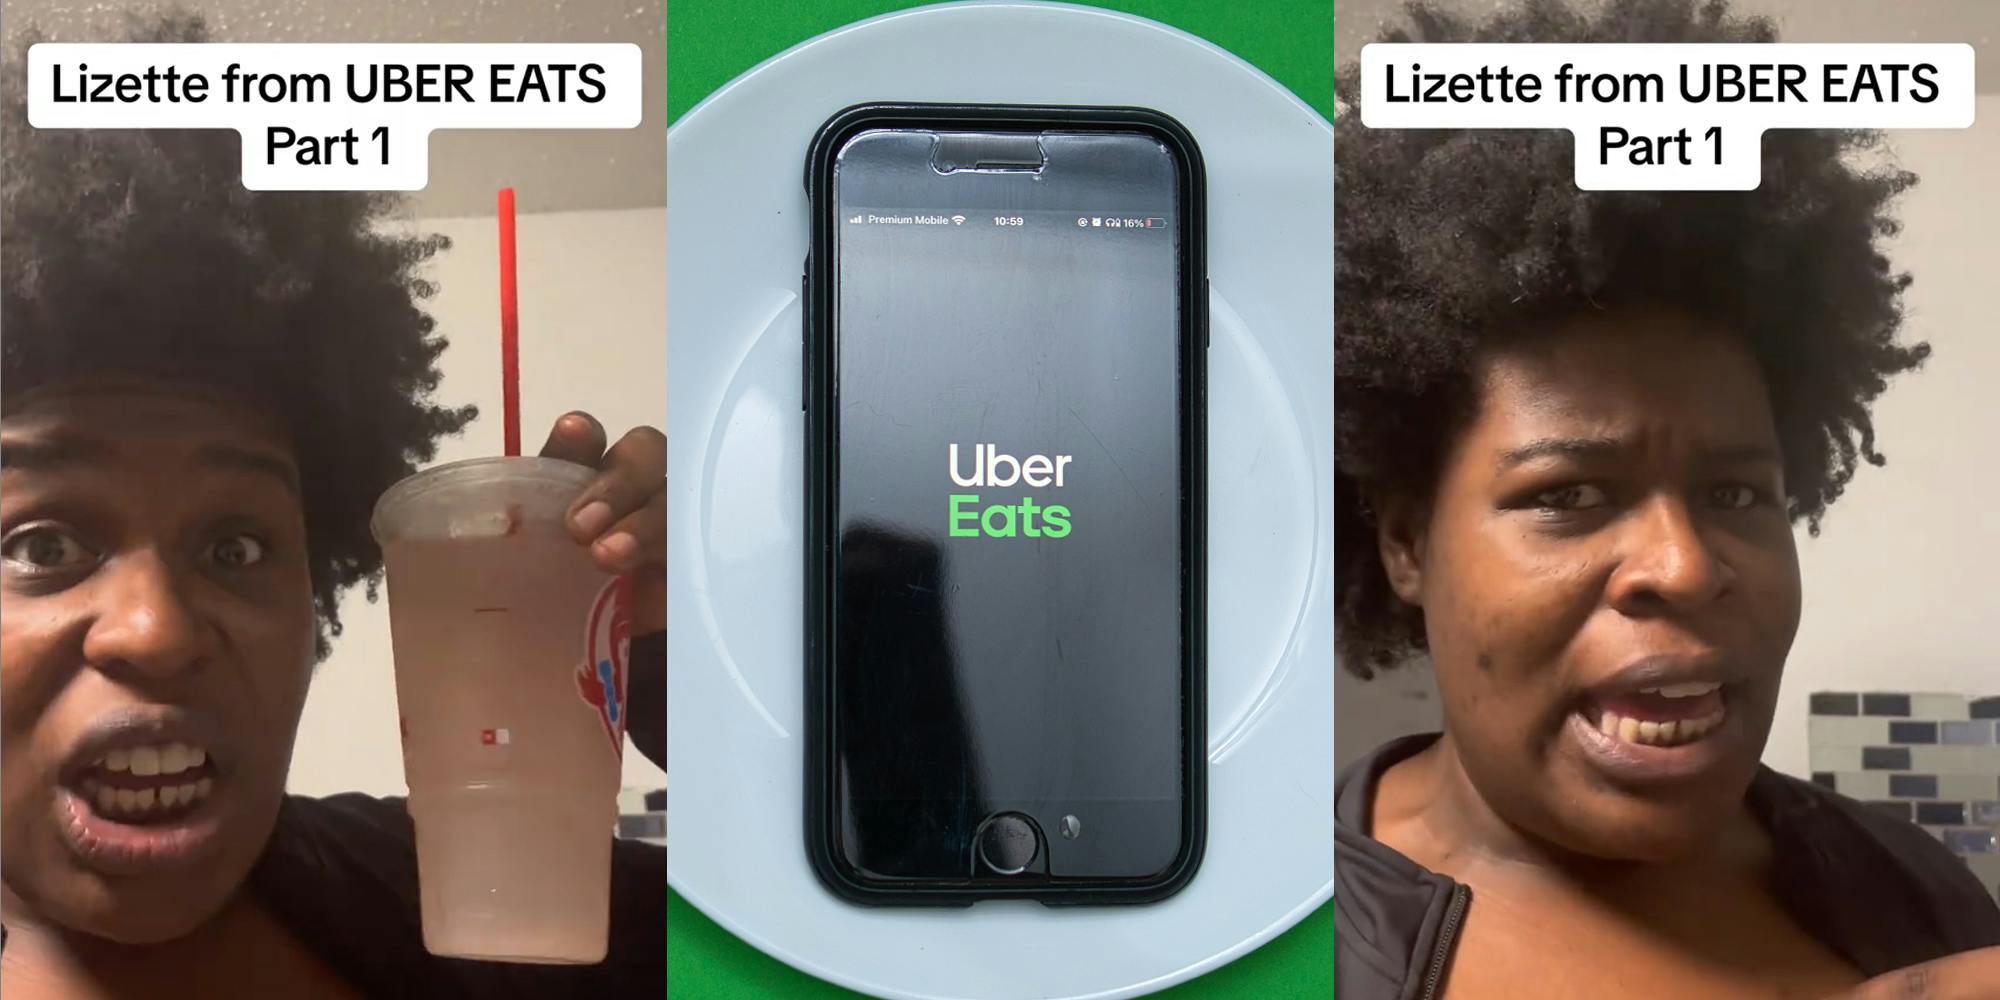 Uber Eats customer with Wendy's strawberry lemonade in hand with caption "Lizette from UBER EATS Part 1" (l) Uber Eats logo on phone screen on white plate over green background (c) Uber Eats customer speaking with caption "Lizette from UBER EATS Part 1" (r)